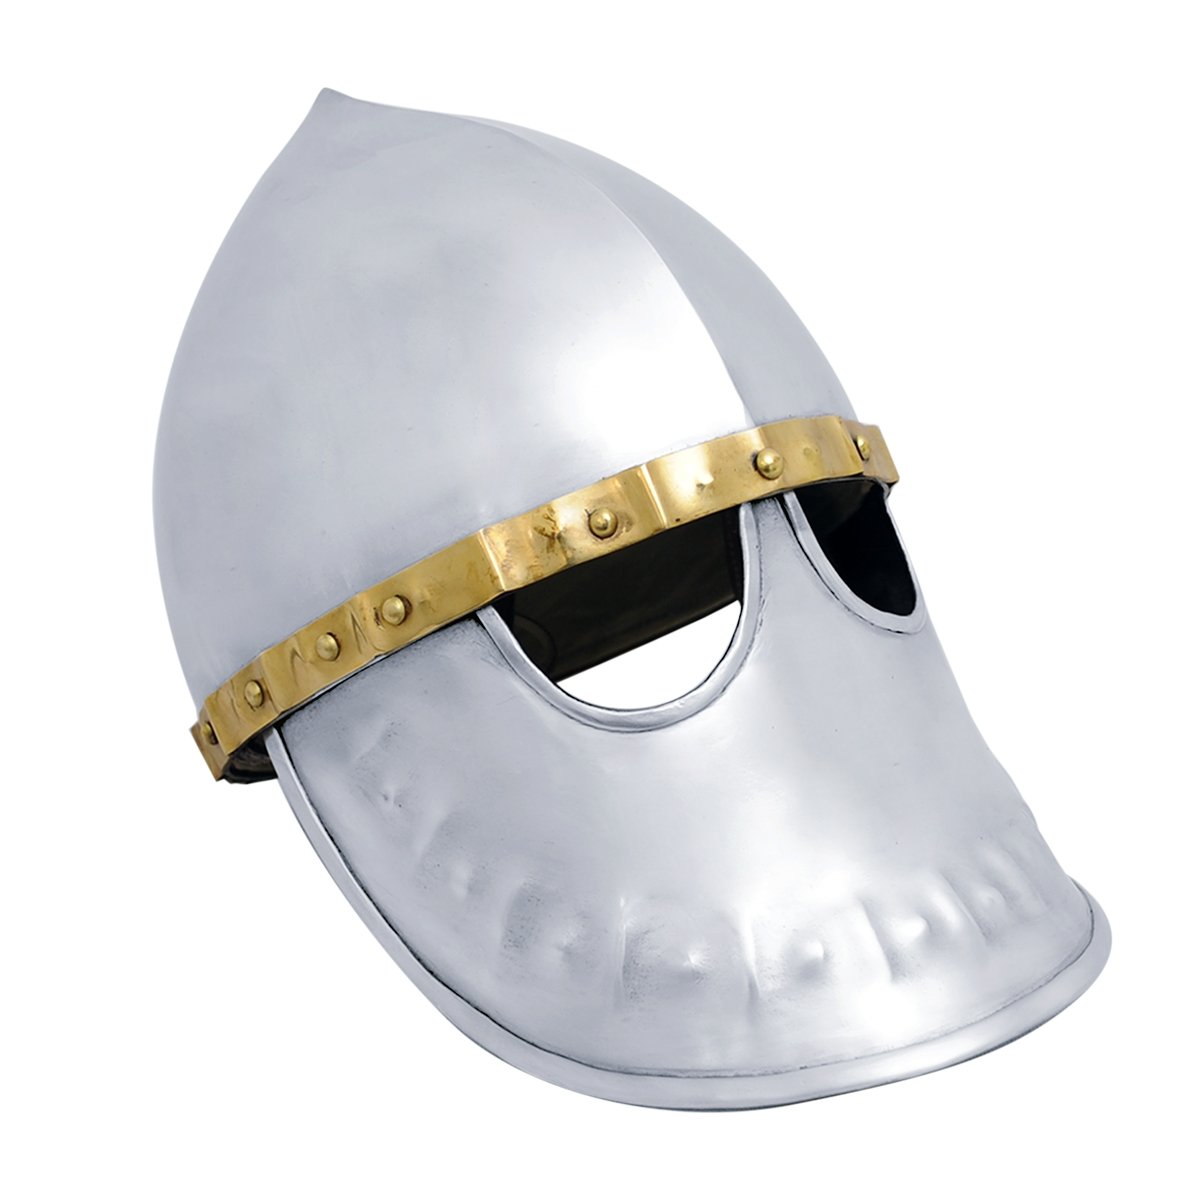 Italo Norman helmet with Face Plate C.1170, Size L